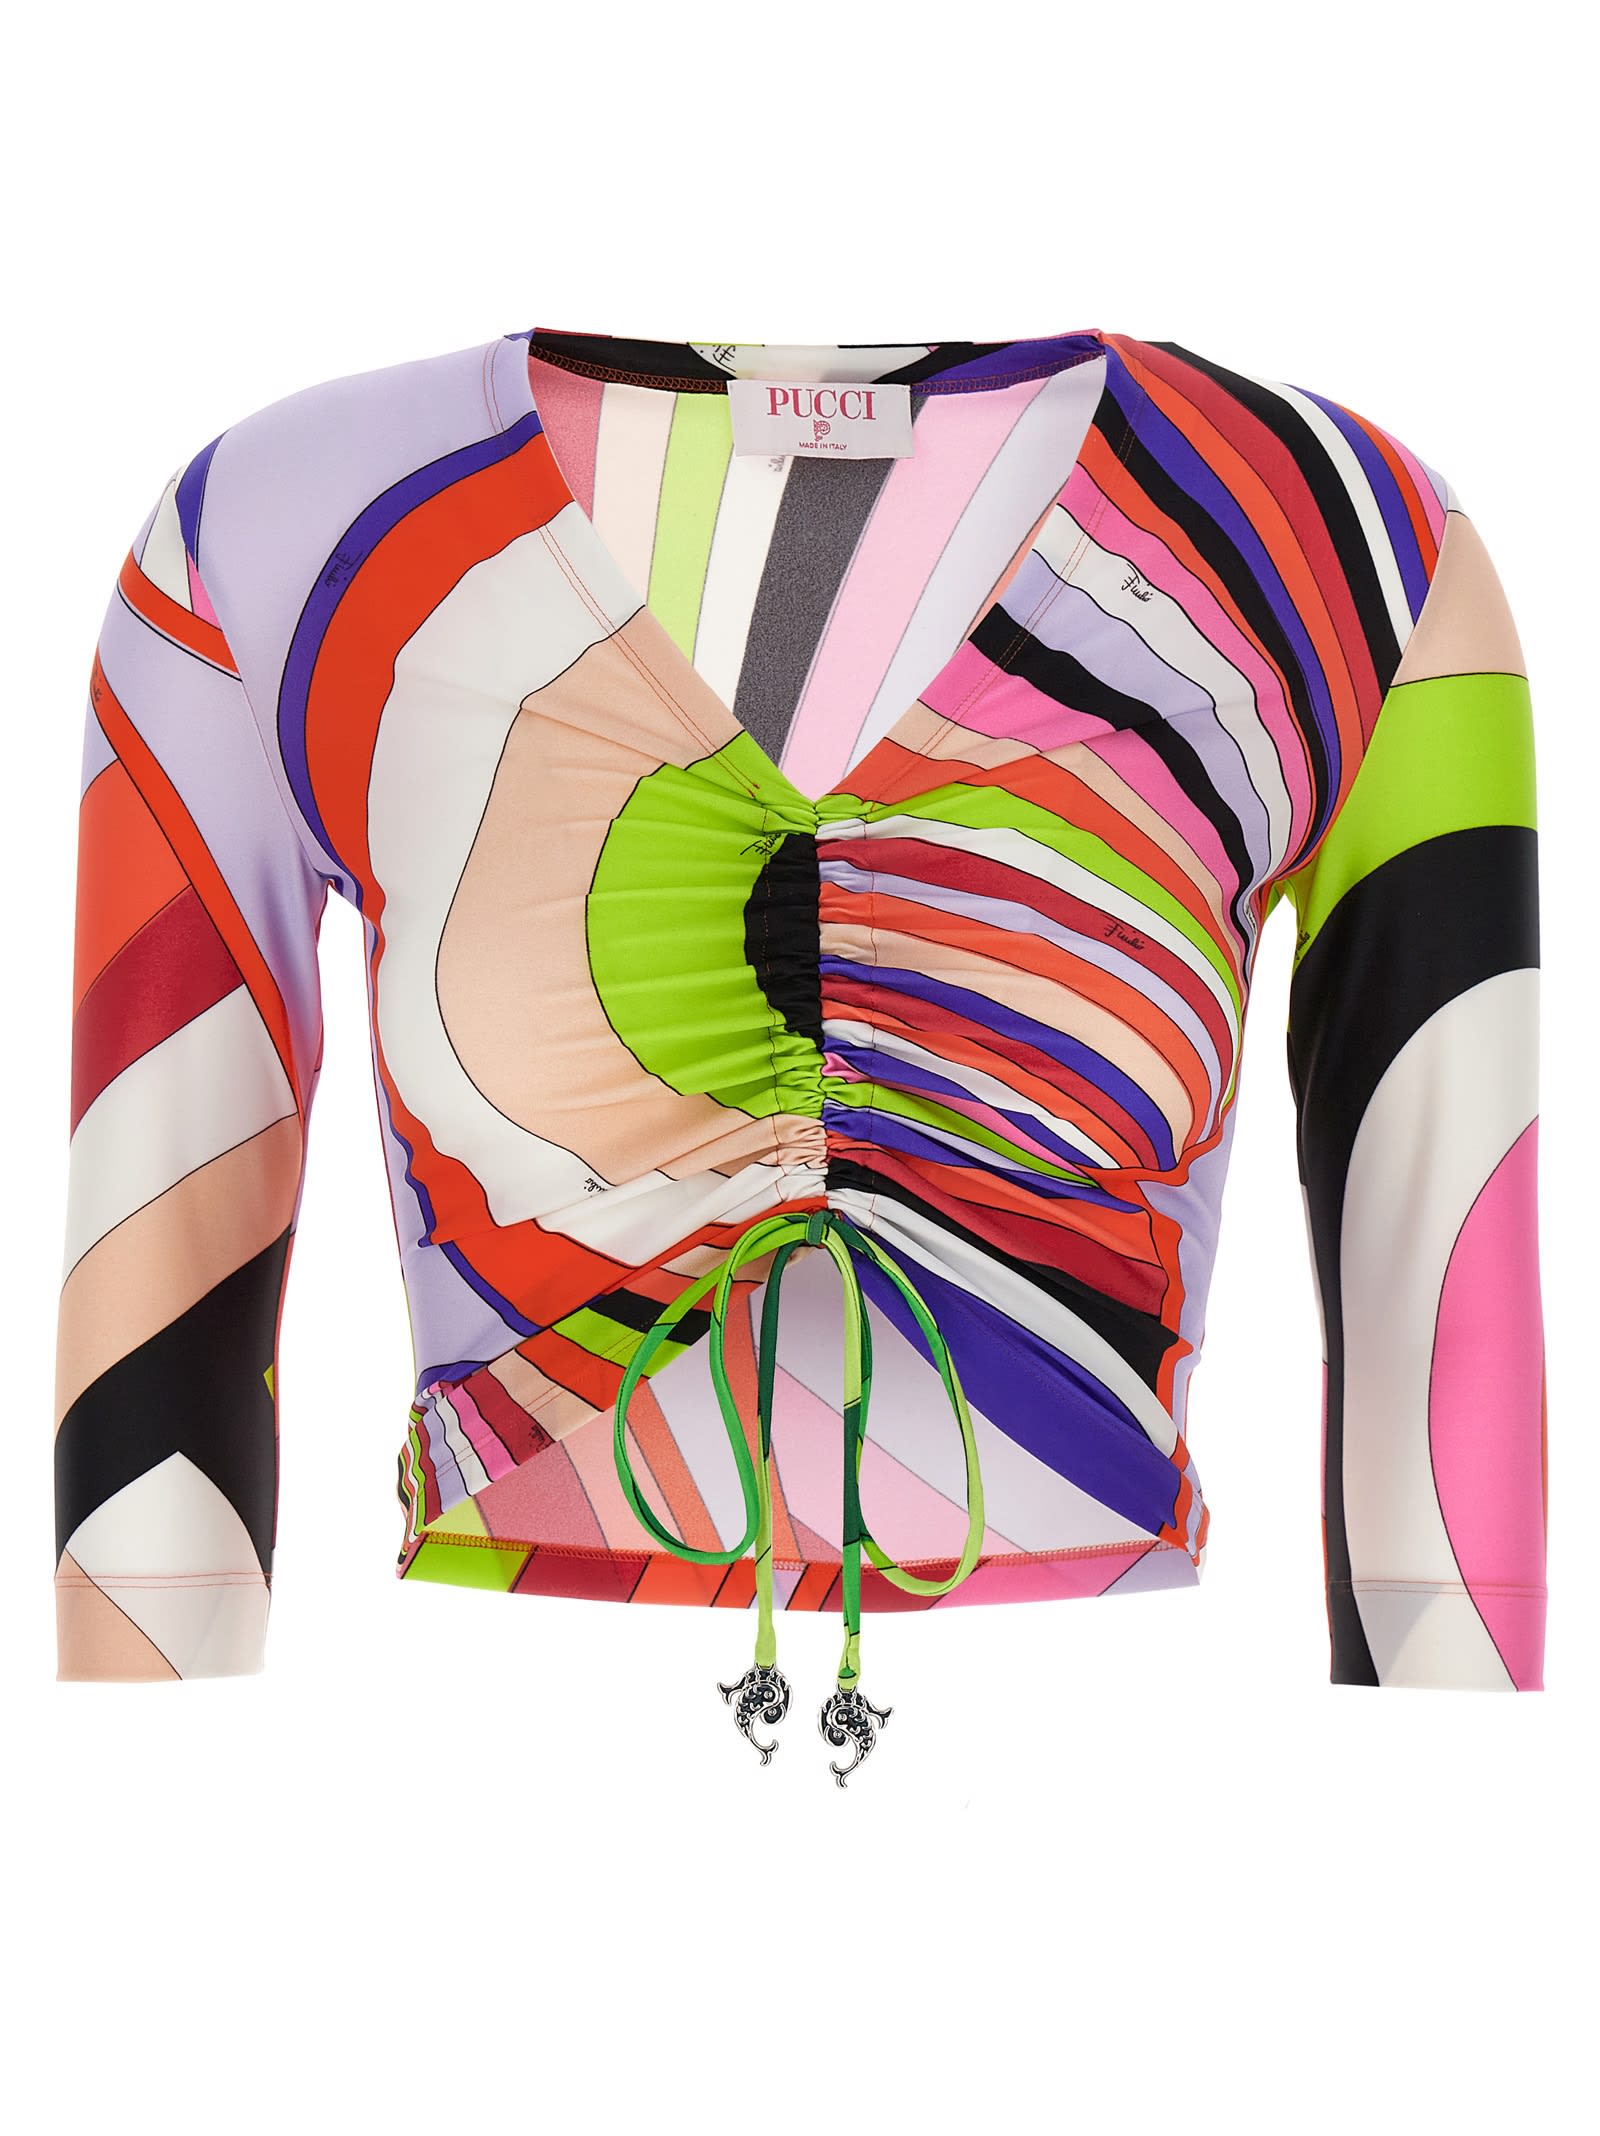 EMILIO PUCCI PATTERNED TOP